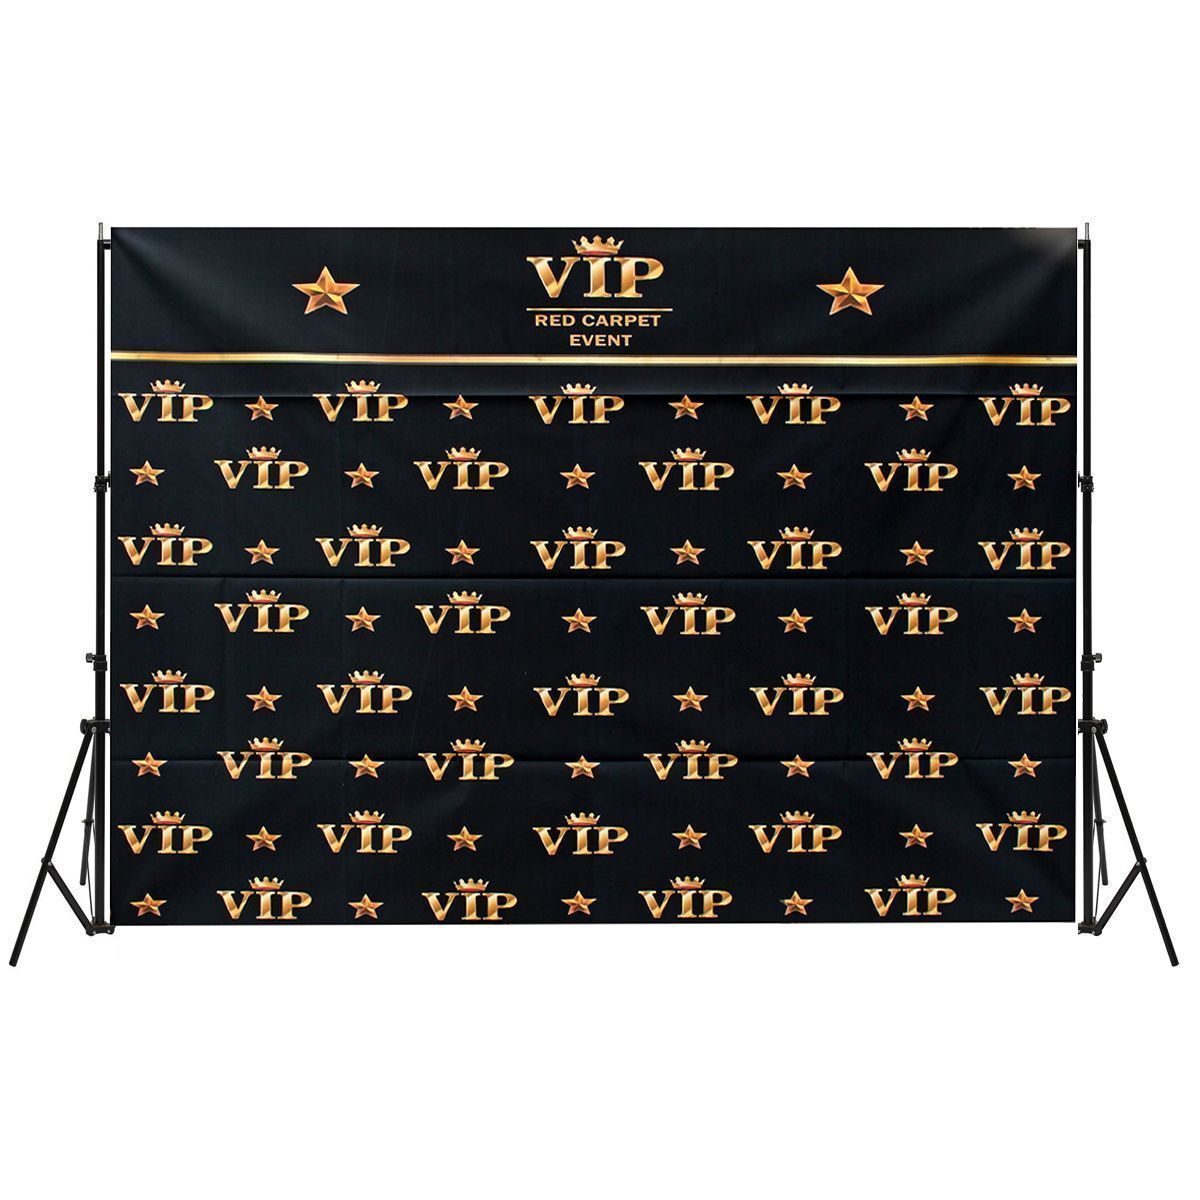 5x3FT-7x5FT-Black-Red-Carpet-Event-VIP-Pattern-Photography-Backdrop-Studio-Prop-Background-1401724